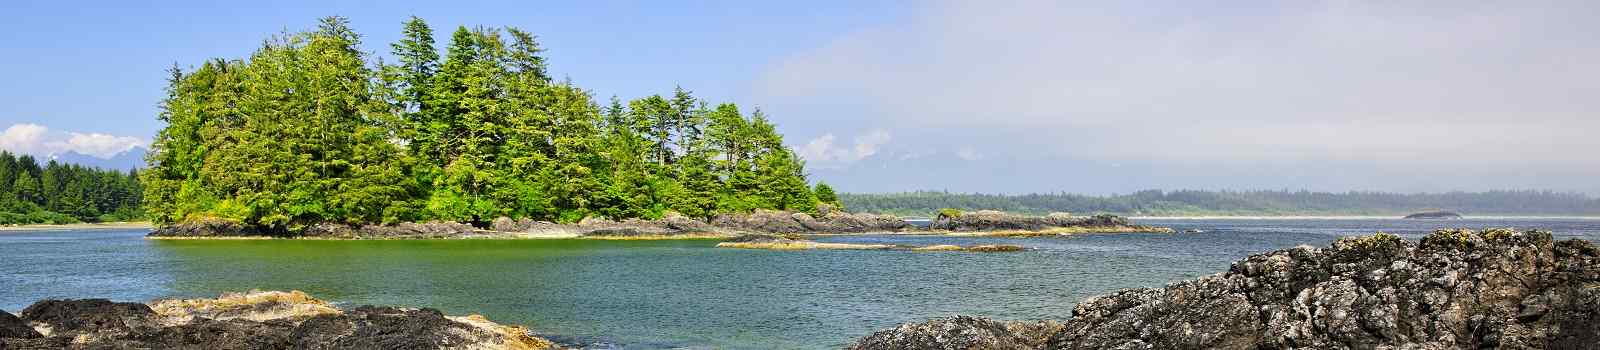 CAD-RM-FPW-LL Kanada Vancouver Island View from Long Beach in Pacific Rim National park